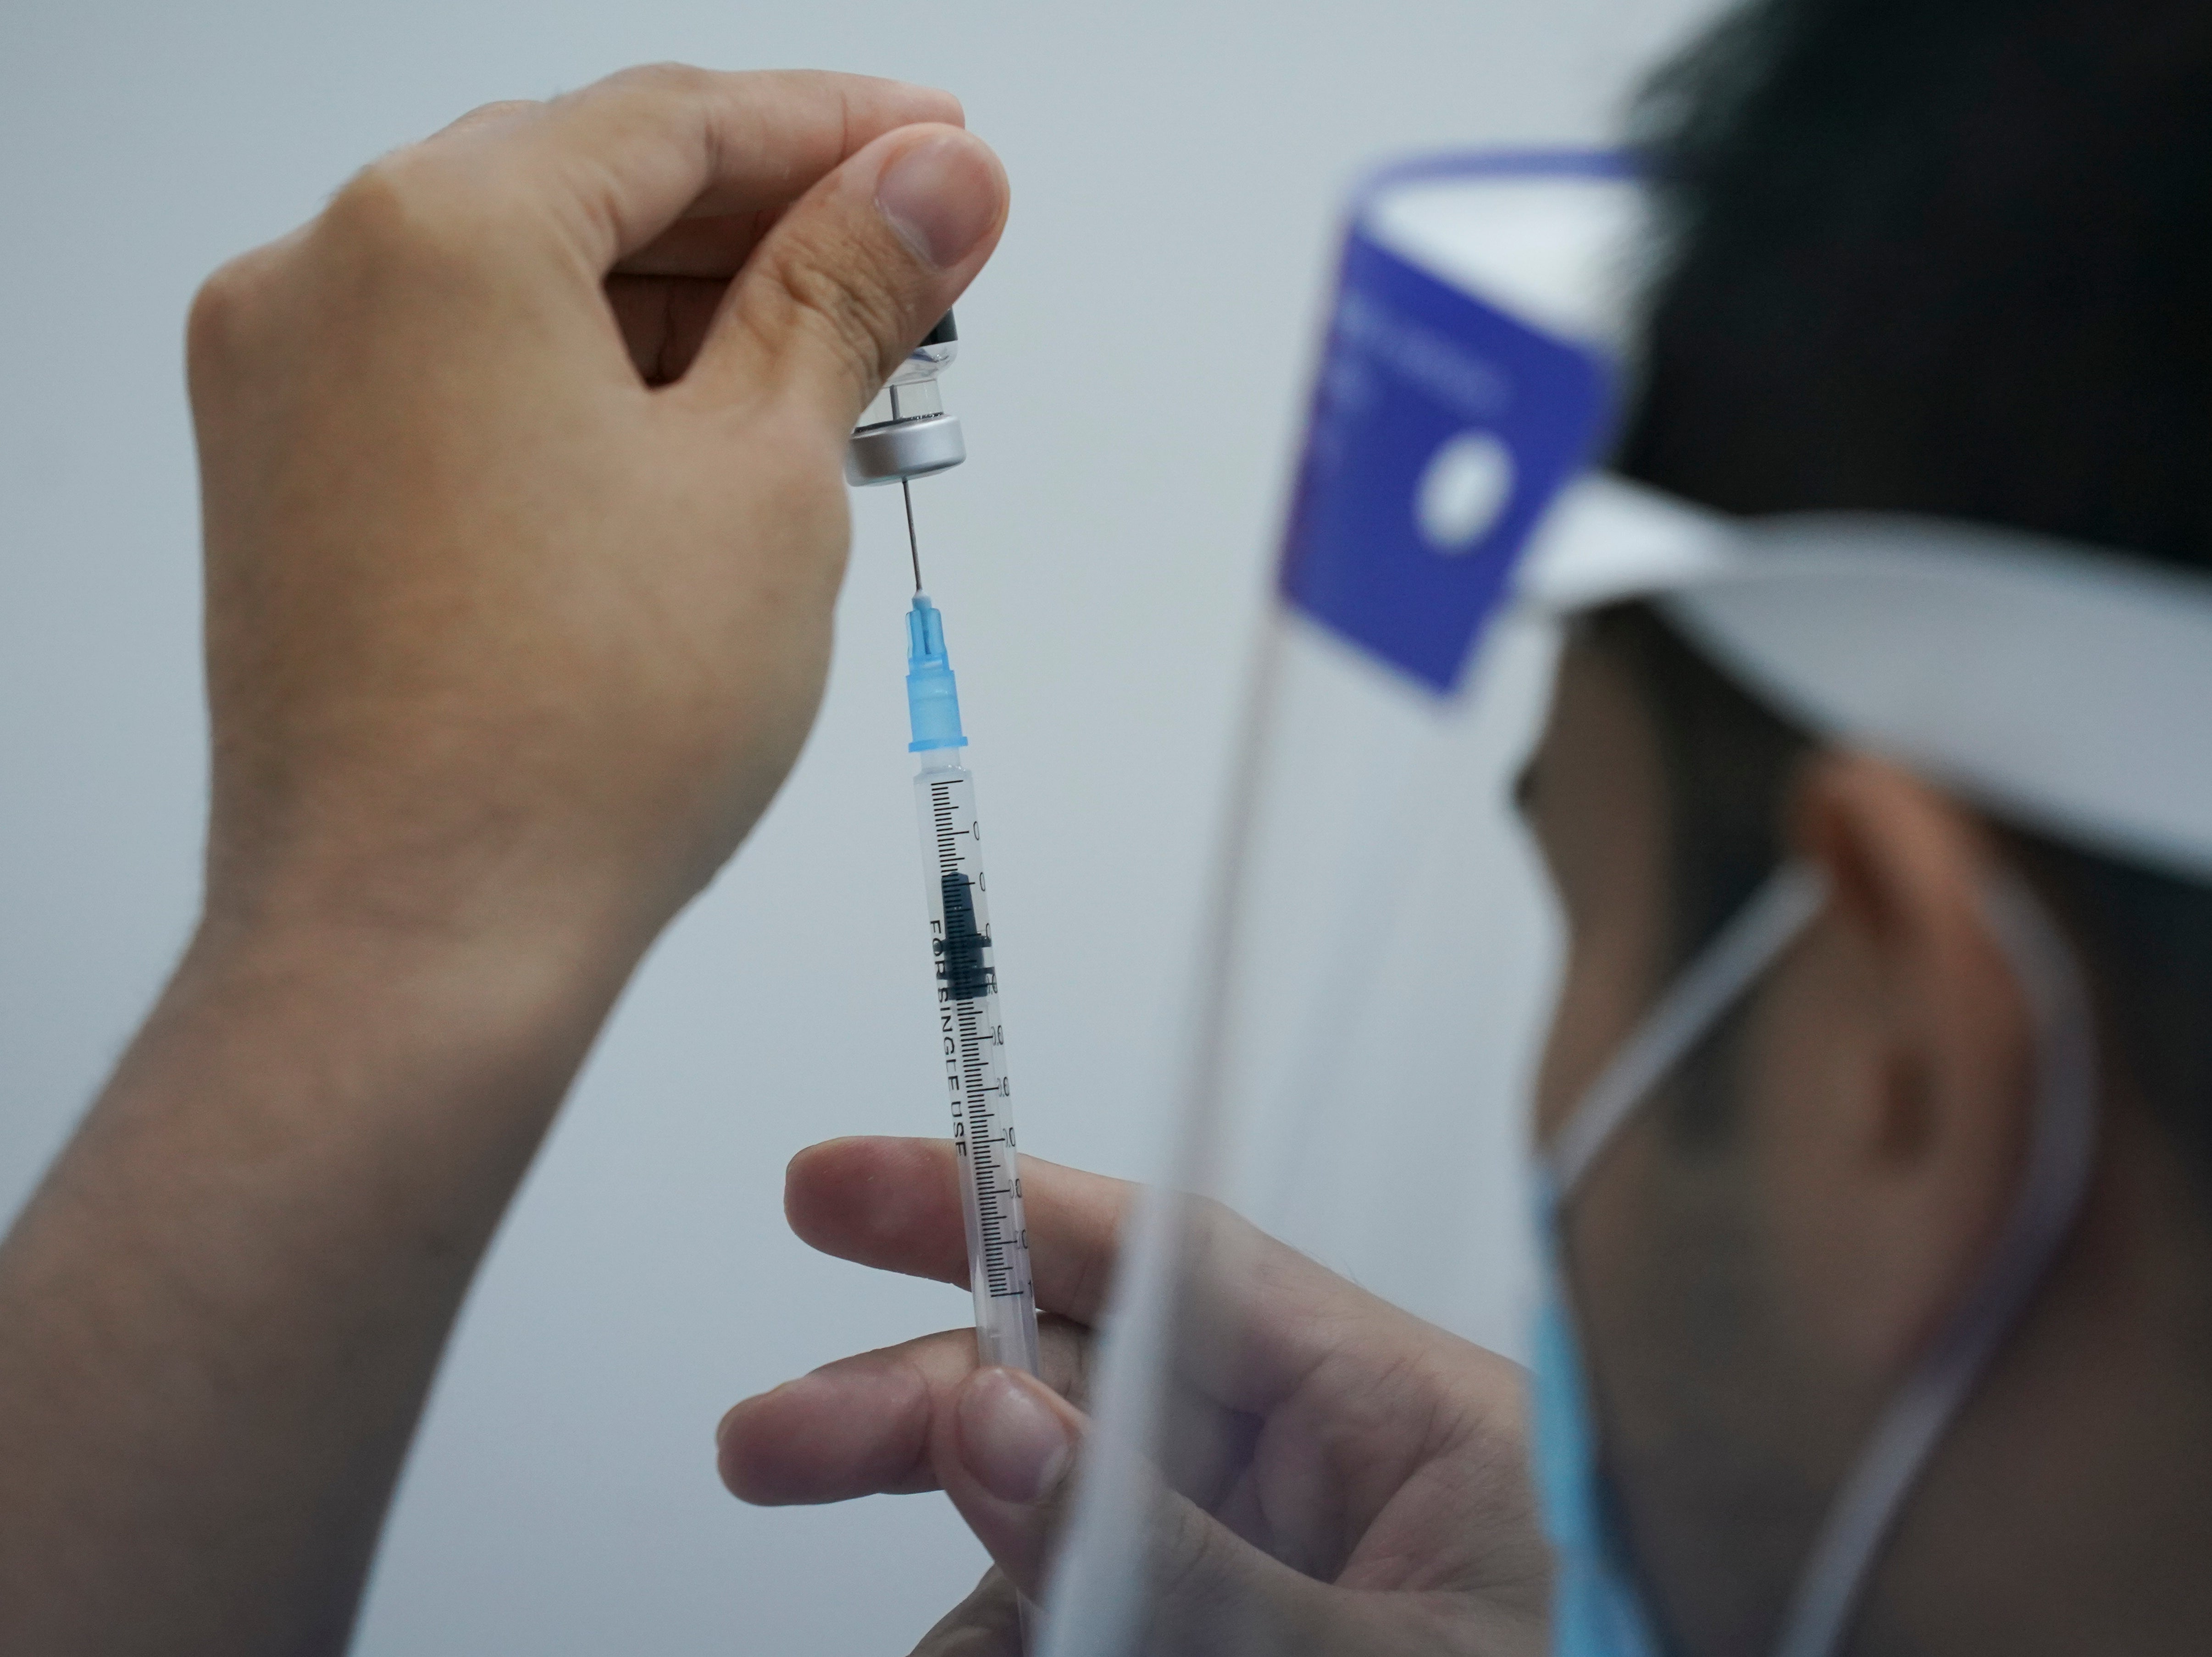 File photo: A health worker prepares to administer Pfizer’s Covid-19 vaccine at a vaccination center in Subang Jaya, Malaysia